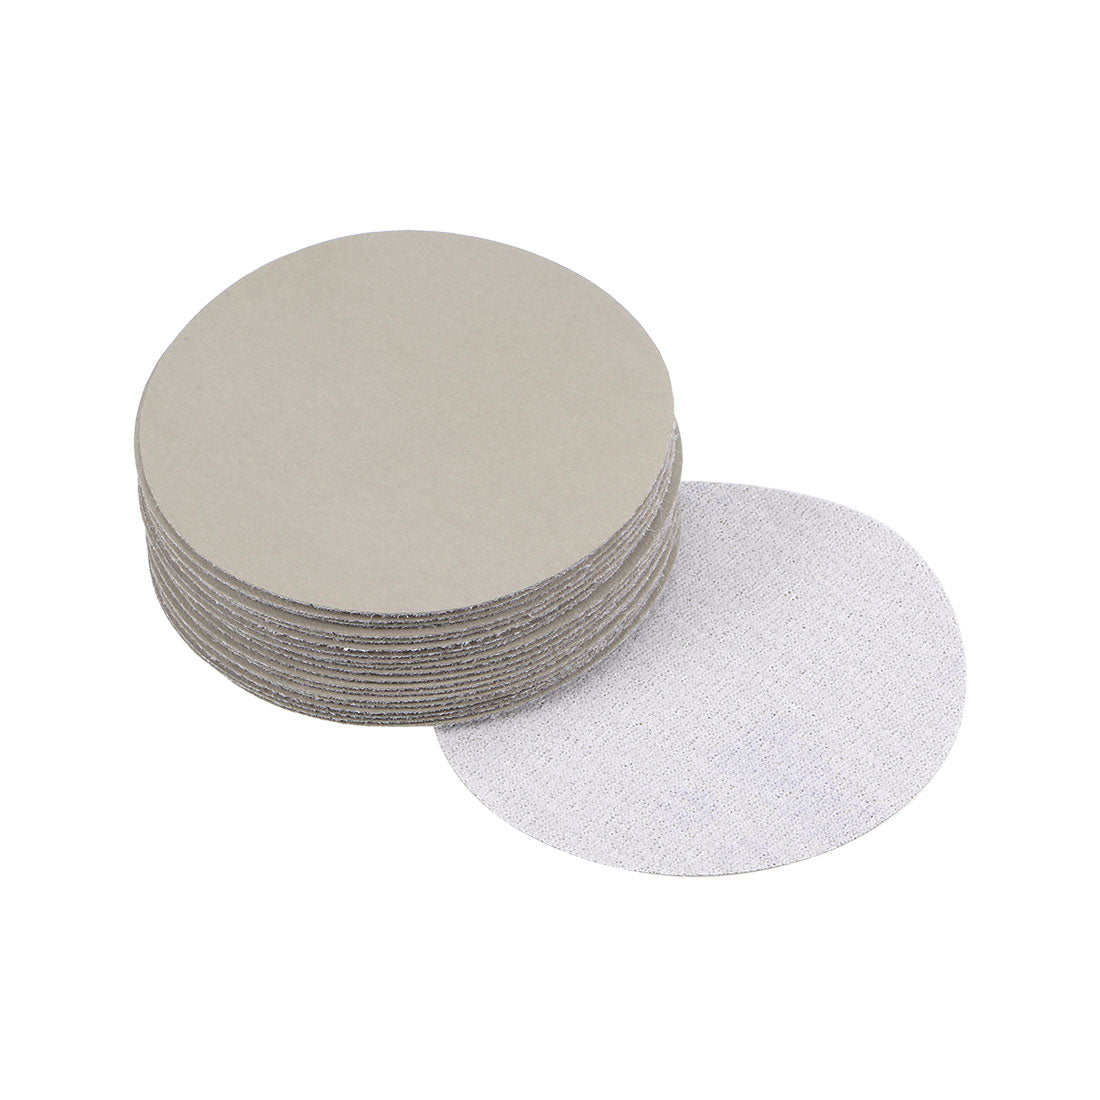 Uxcell Uxcell 3 inch Wet Dry Disc 7000 Grit Hook and Loop Sanding Disc Silicon Carbide 20pcs